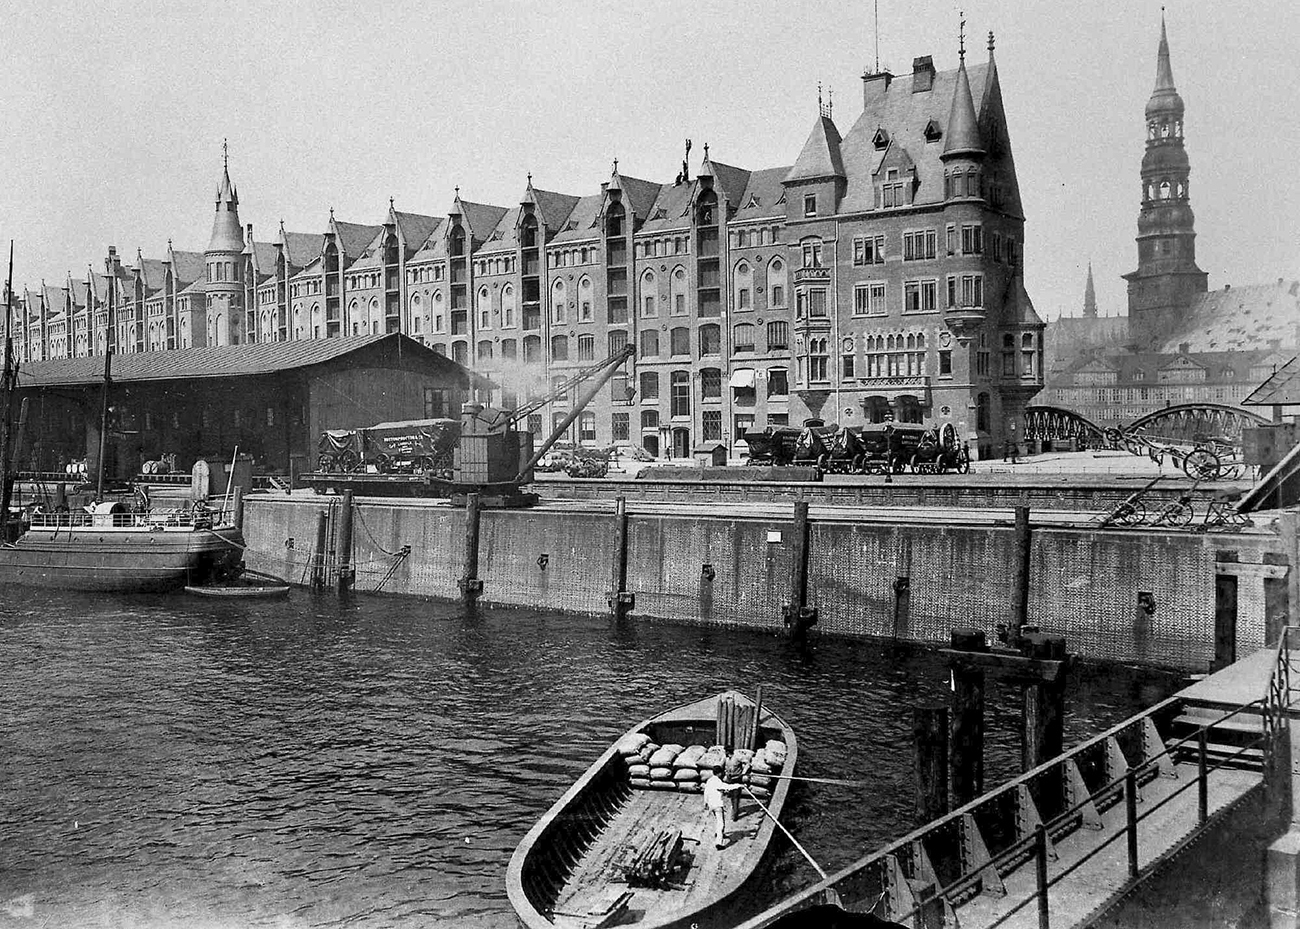 Hamburg-Altstadt, Sandtorkai: HLFG headquarters and coffee exchange in the background St. Katharinen, ca. 1890 © Picture Archive Monument Protection Office, Johann and Heinrich Hamann